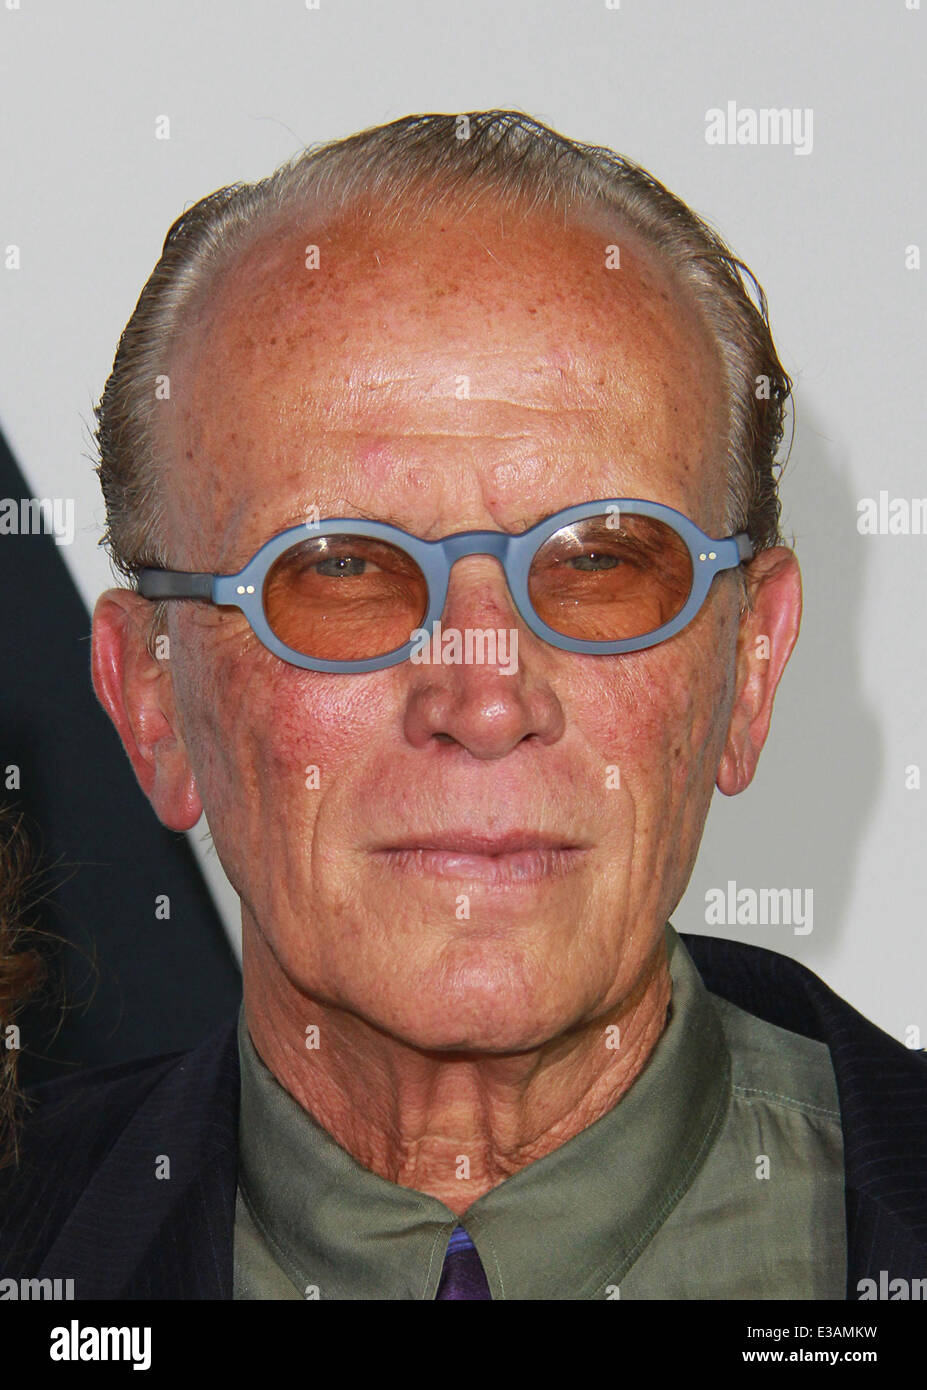 Paramount Pictures Celebrates The Blu-ray And DVD Debut Of 'Star Trek: Into Darkness' Held at California Science Center  Featuring: Peter Weller Where: Los Angeles, California, United States When: 11 Sep 2013 Stock Photo